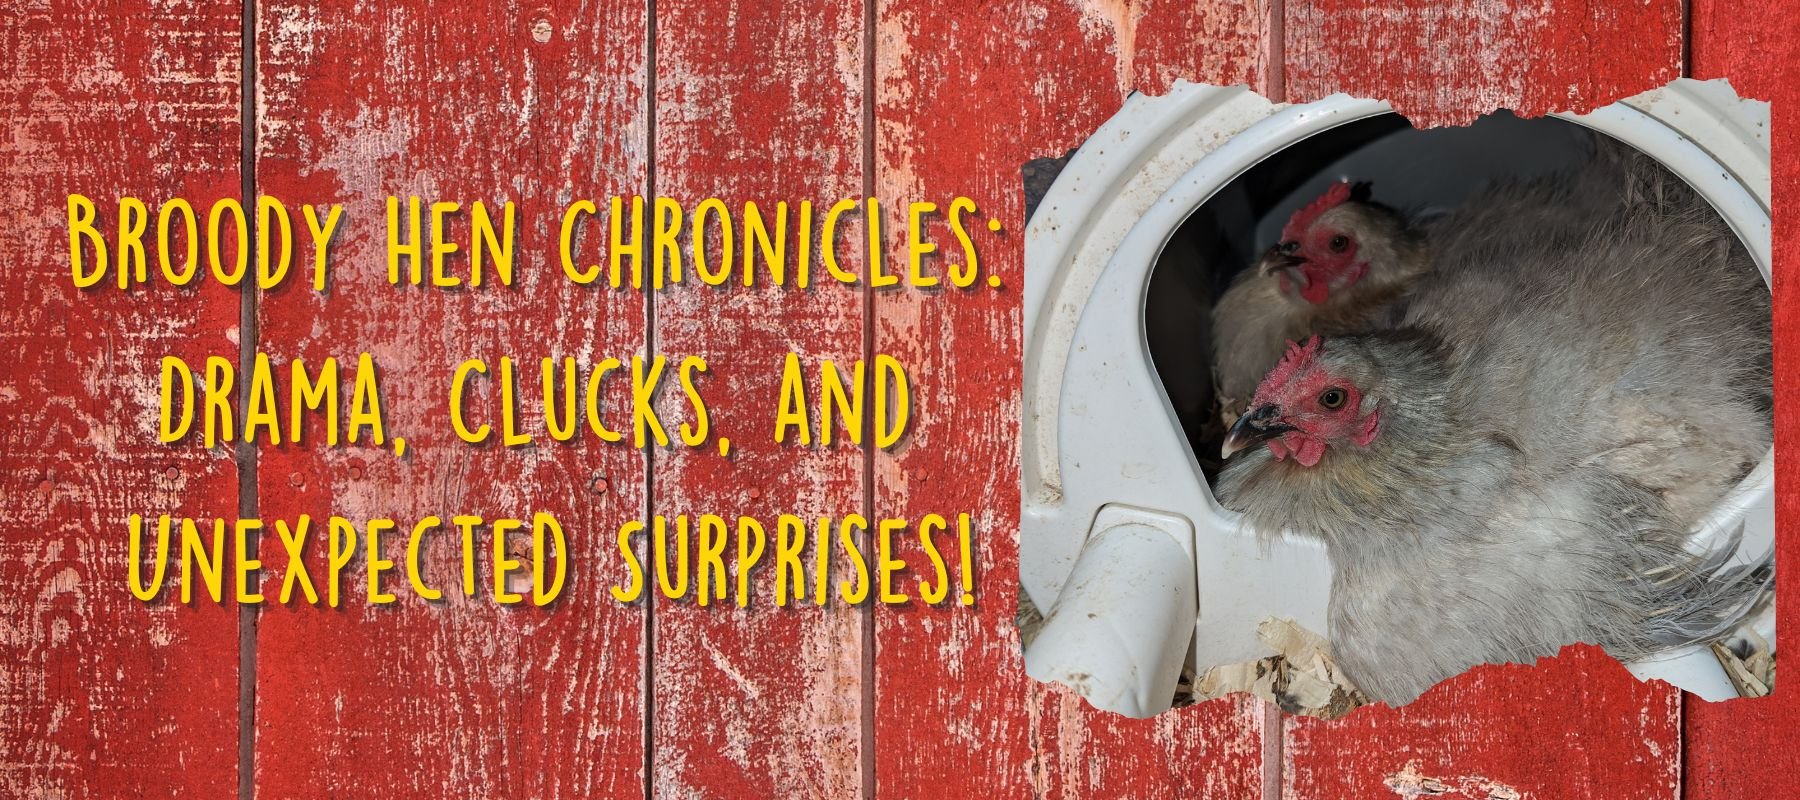 Broody Hen Chronicles: Drama, Clucks, and Unexpected Surprises! - Cluck It All Farms